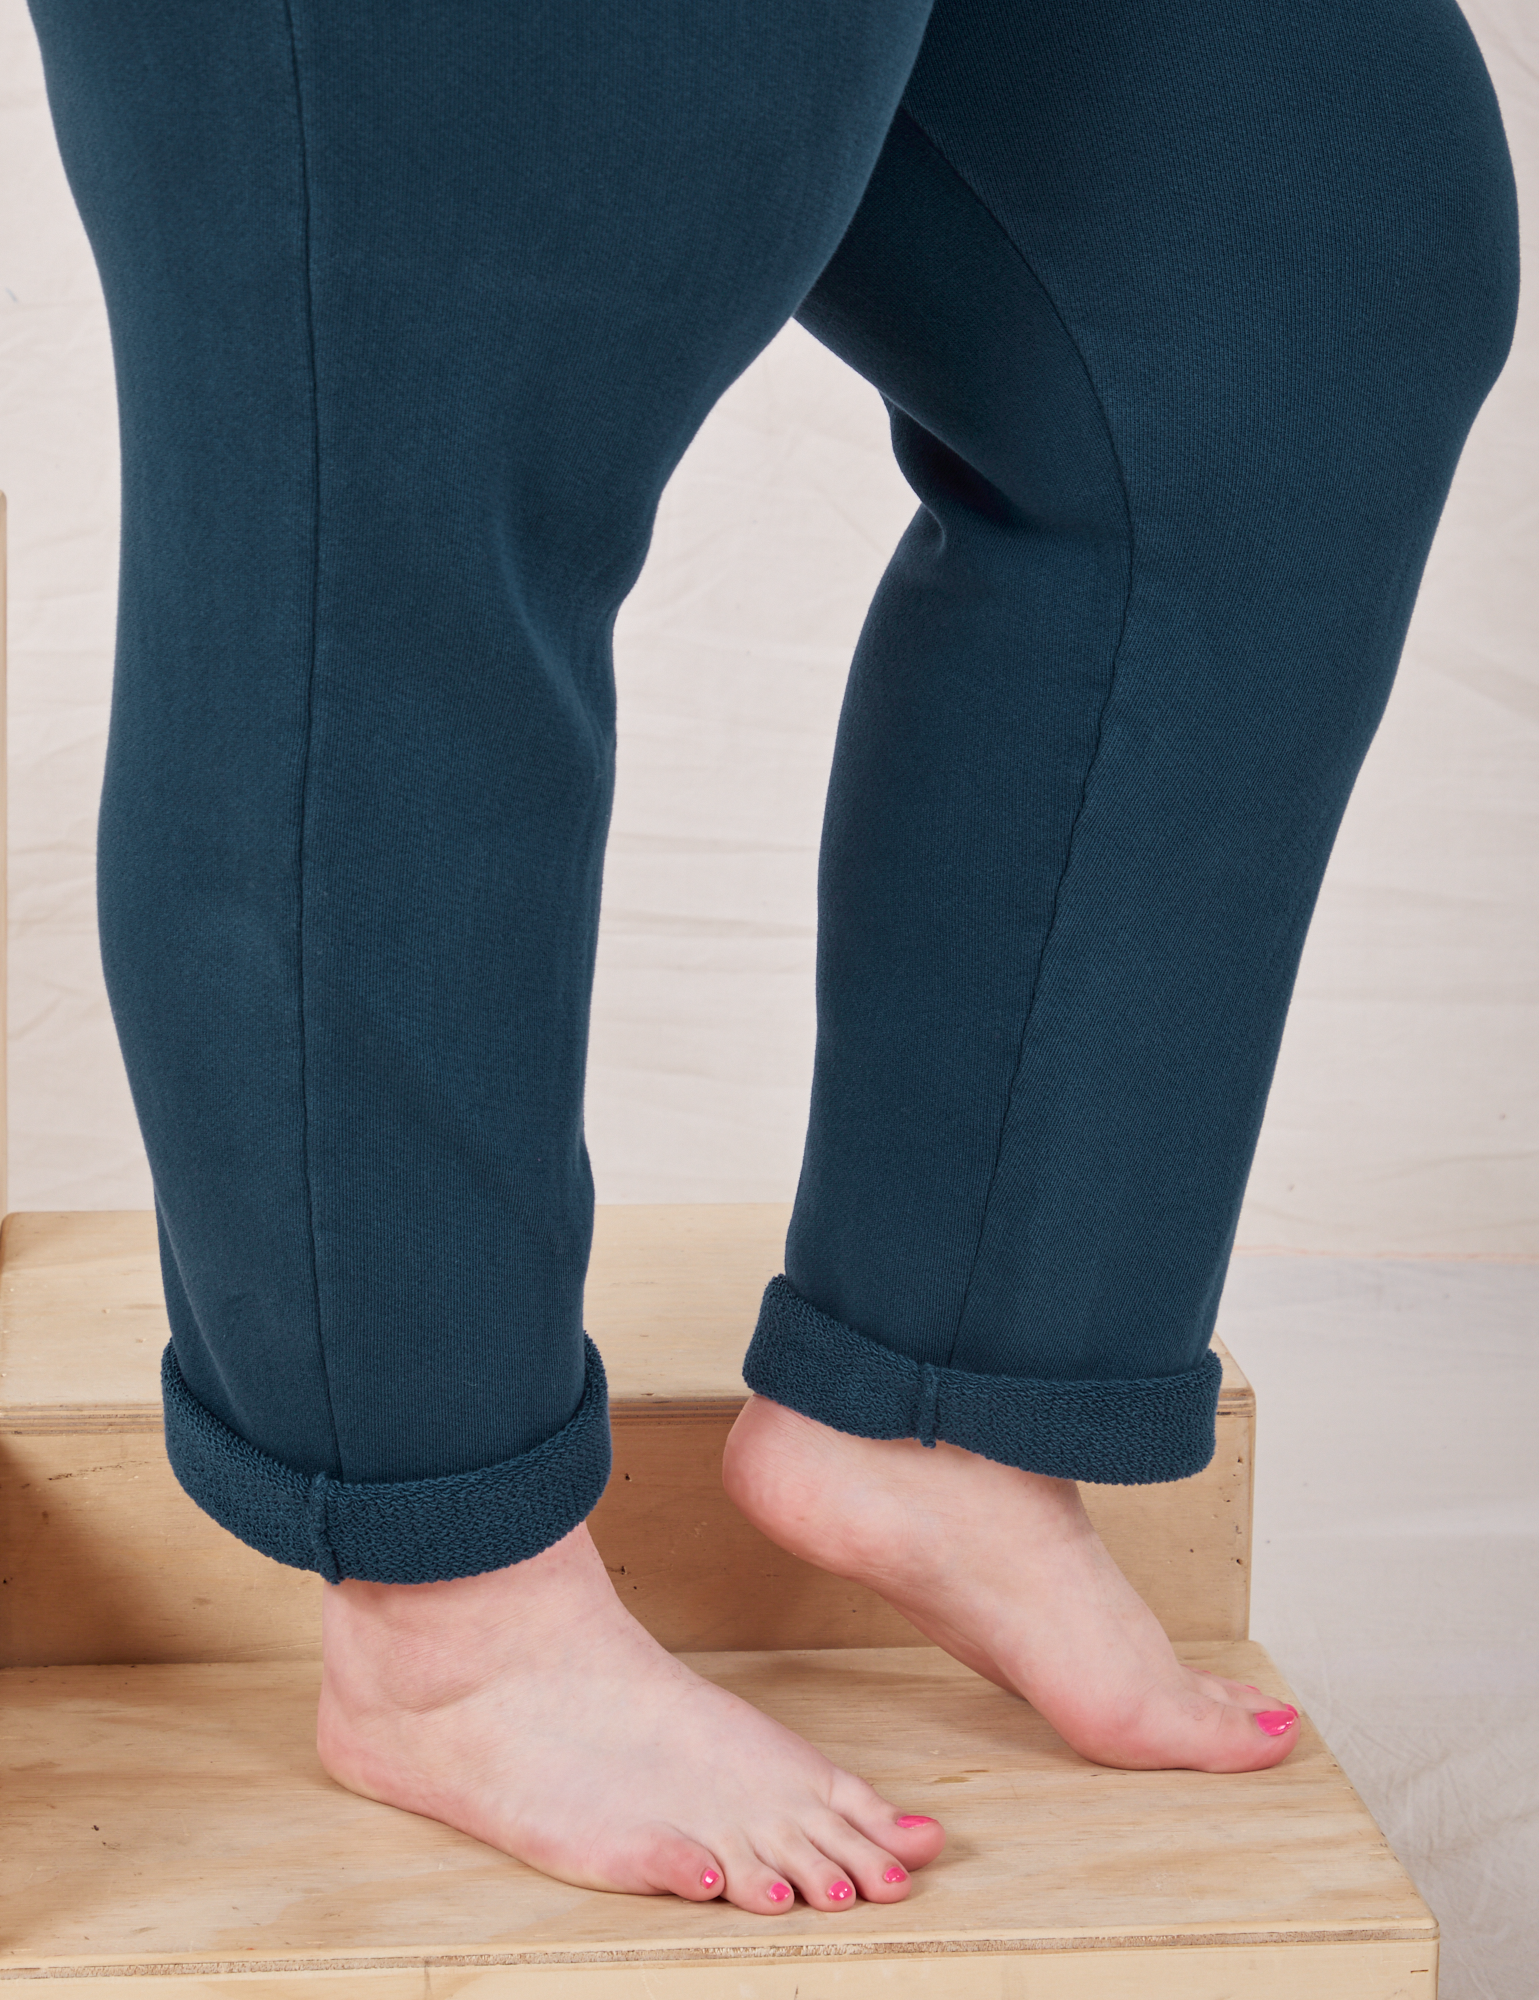 Rolled Cuff Sweat Pants in Lagoon side pant leg close up on Marielena